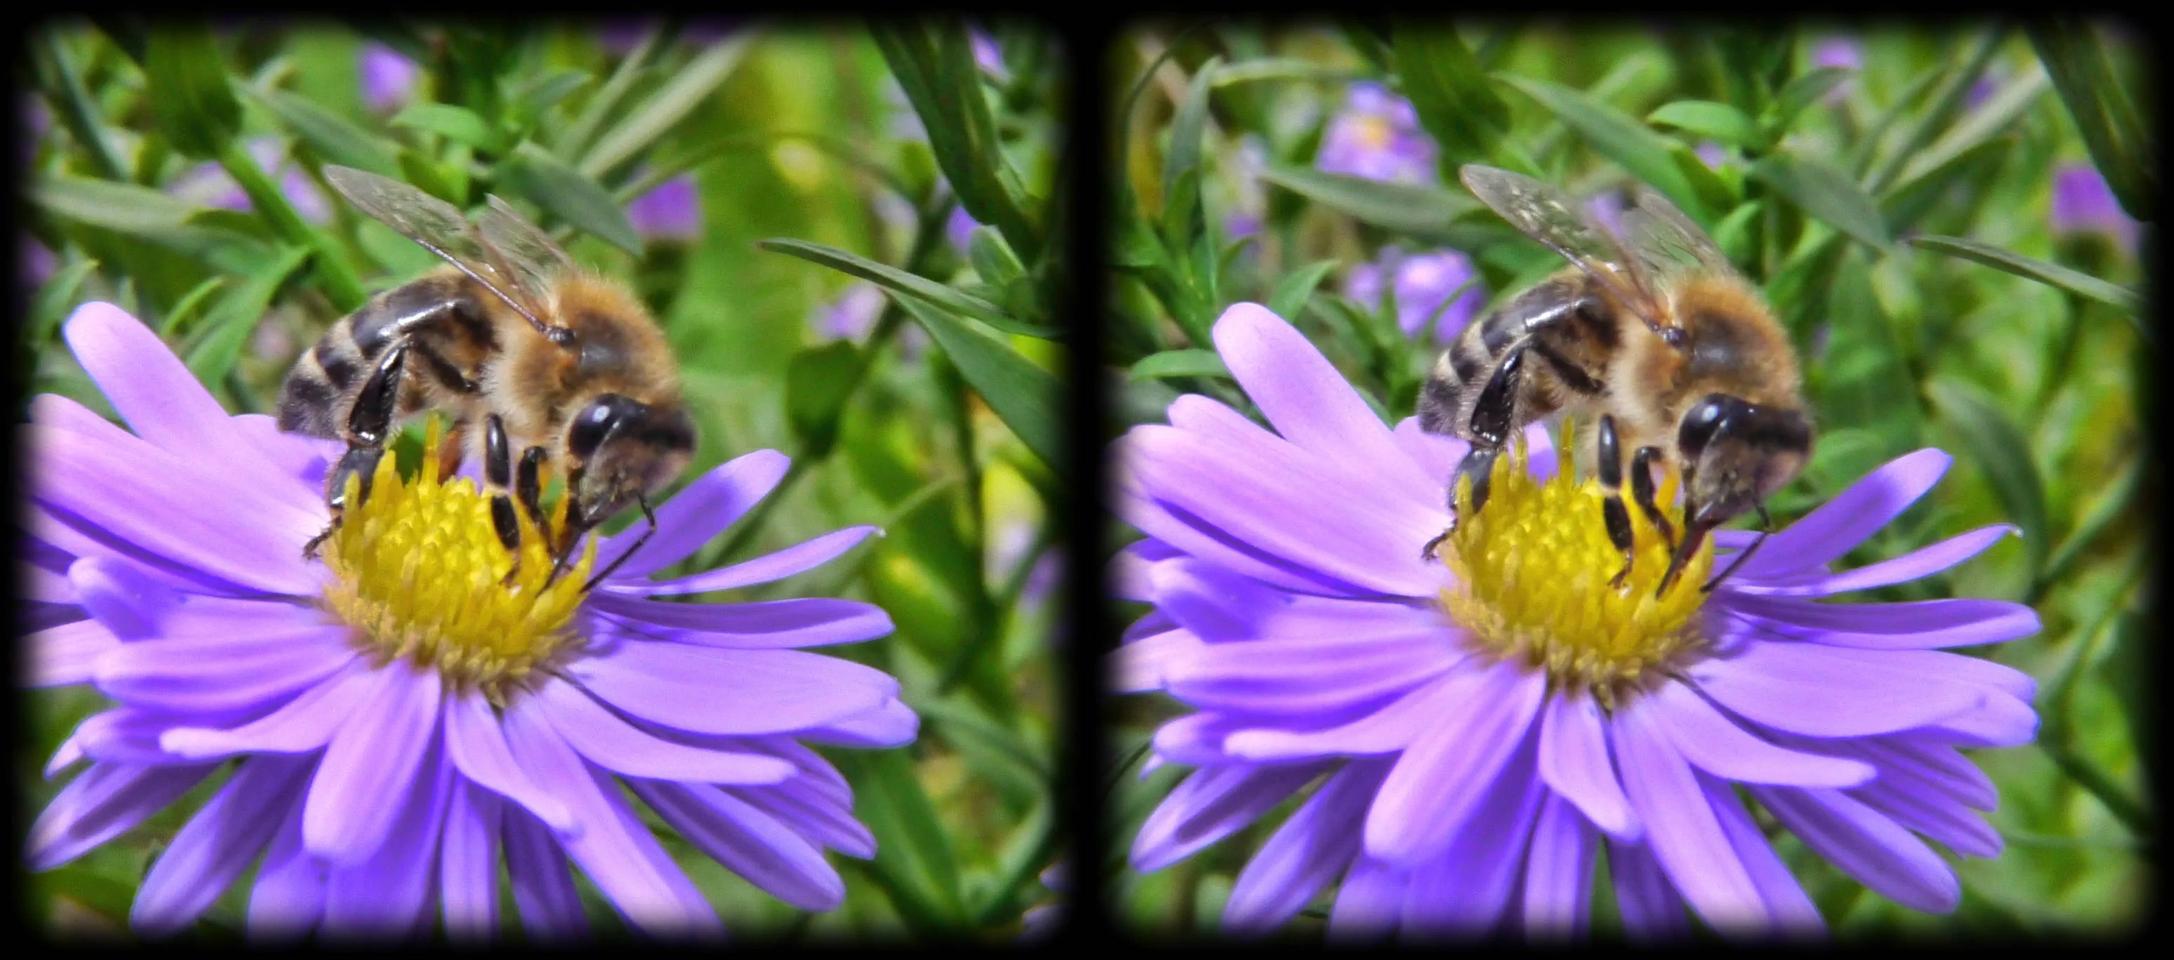 Another (or the same) Bee on a Flower